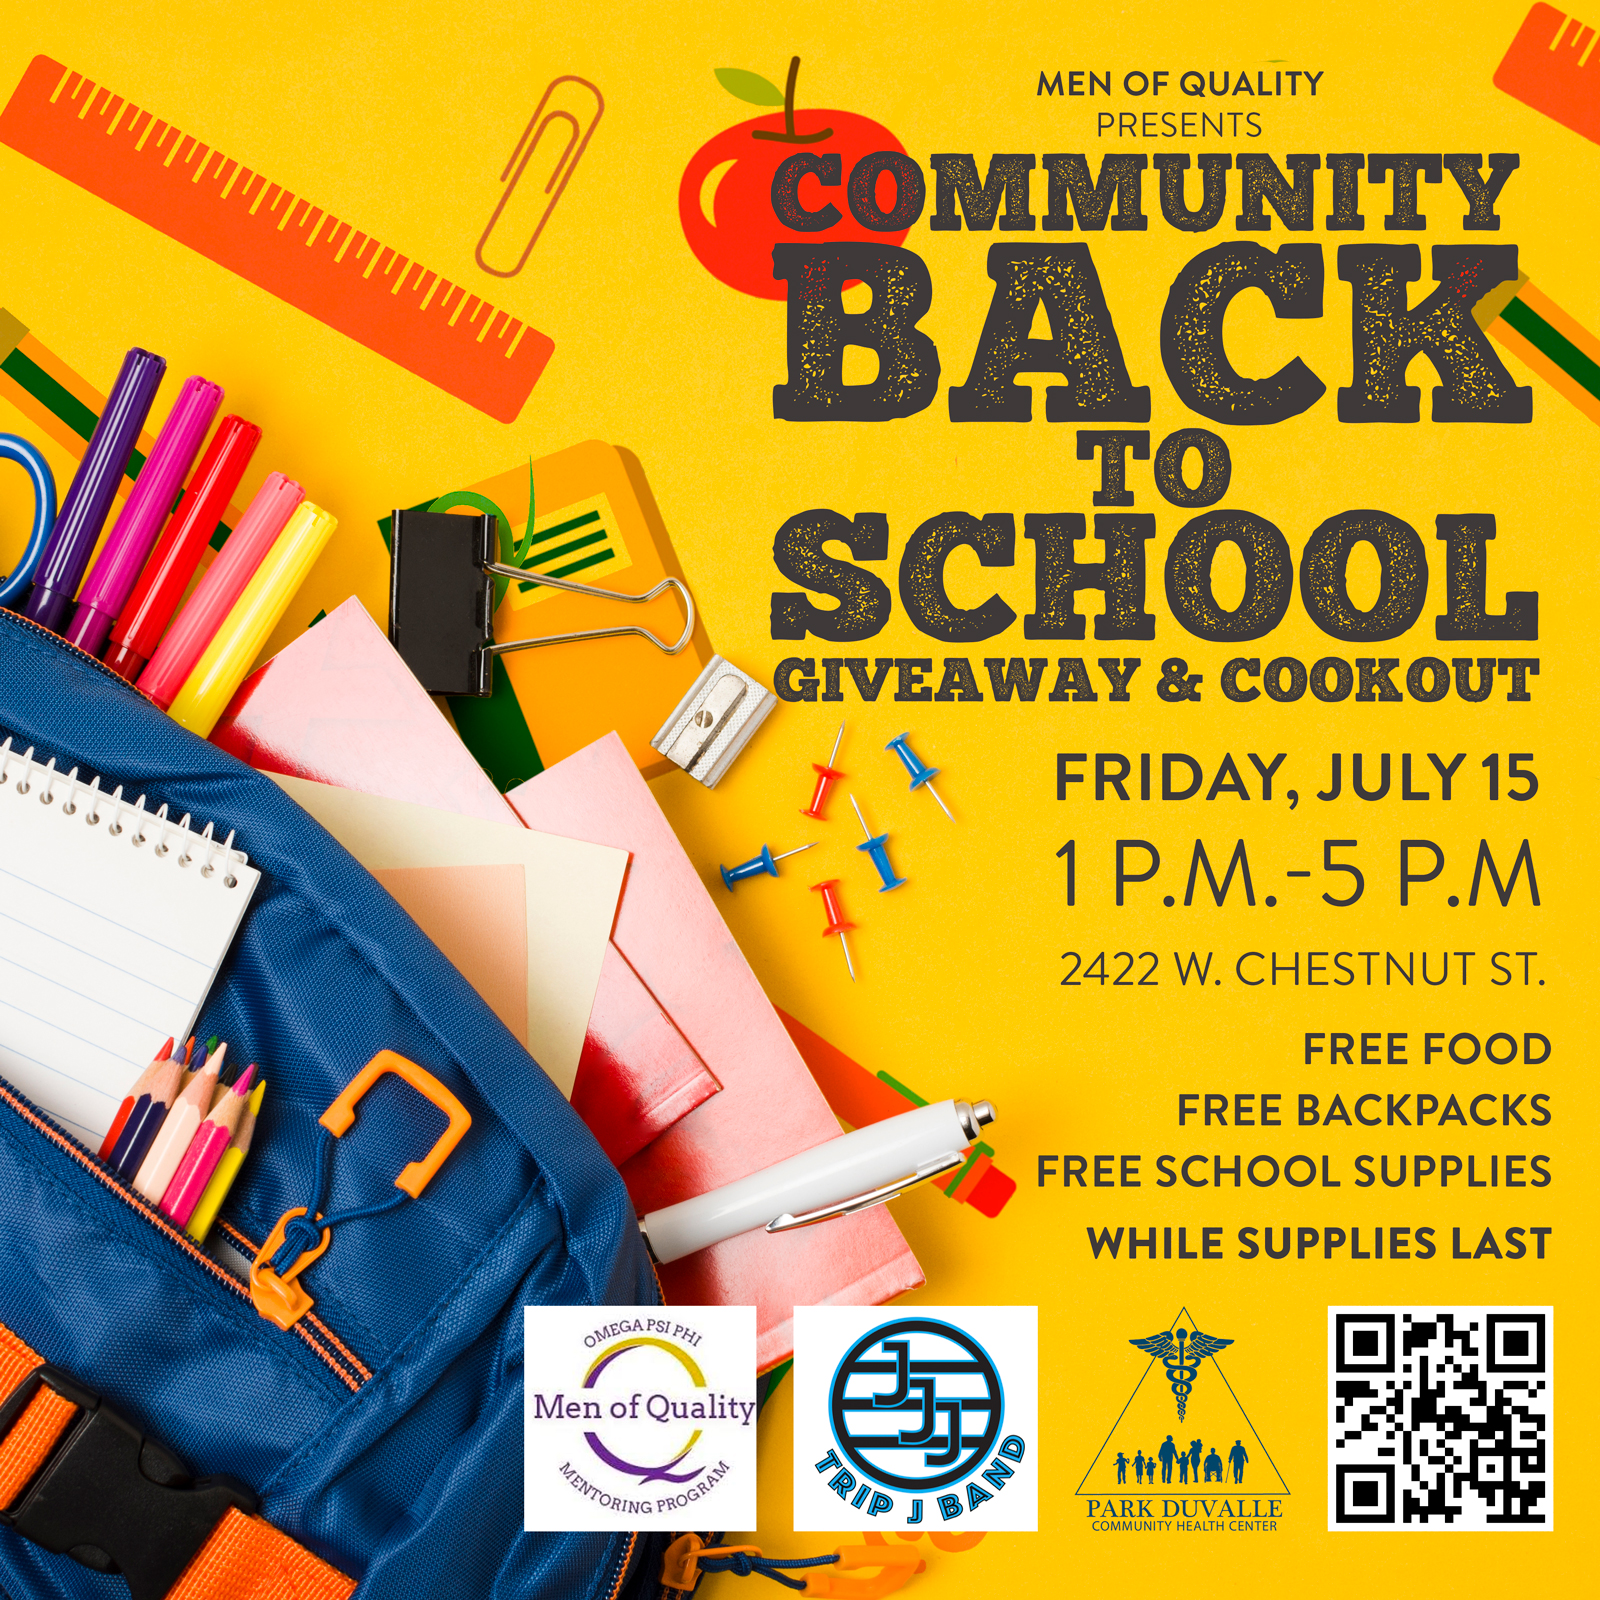 <h1 class="tribe-events-single-event-title">Men of Quality “Community Back to School Giveaway And Cookout”</h1>